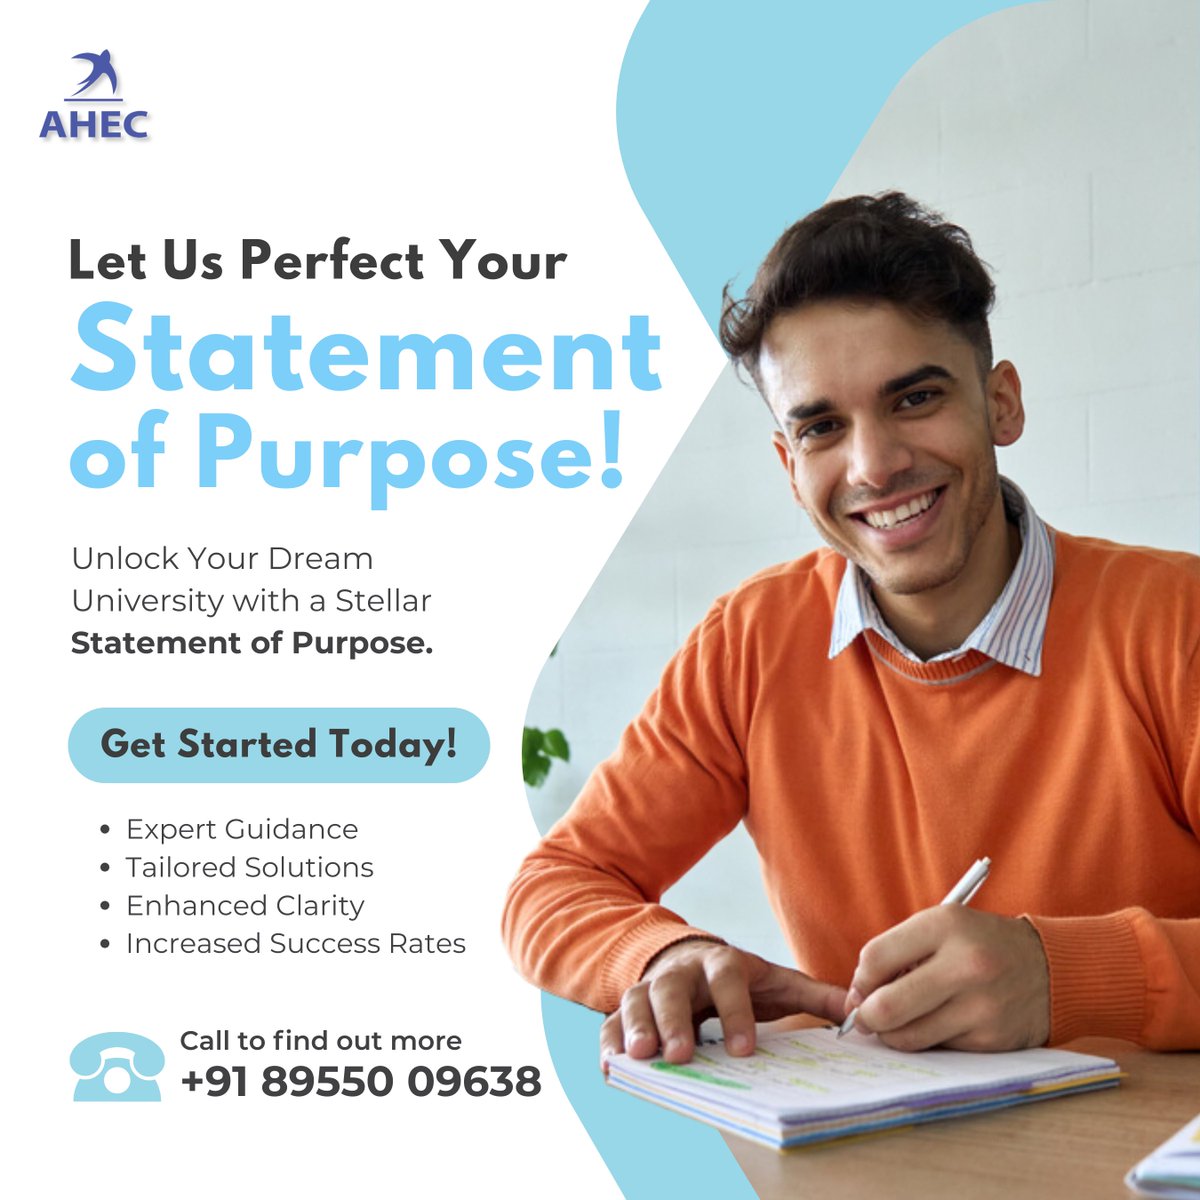 Let Us Perfect Your Statement of Purpose!
Contact: +91 89550 09638
#sop #statementofpurpose #SOPWriting #sow #statementofwork #technology #writing #writingtips #writer #writerslife #academicwriting #students #academiclife #AcademicSuccess #college #collegelife #studentlife